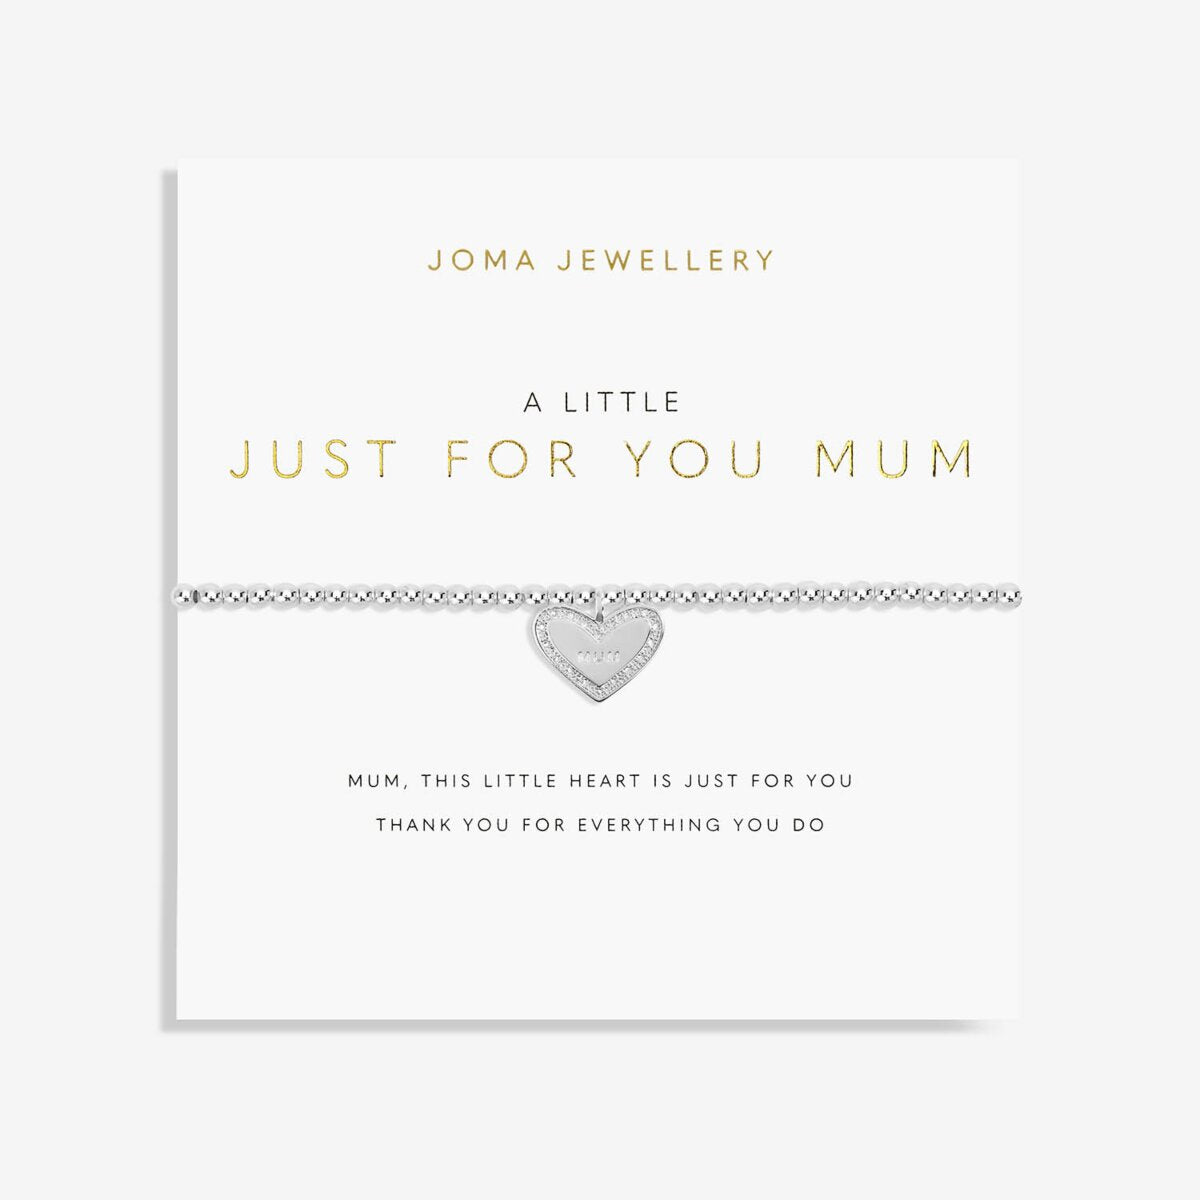 JOMA JEWELLERY | A LITTLE | JUST FOR YOU MUM BRACELET